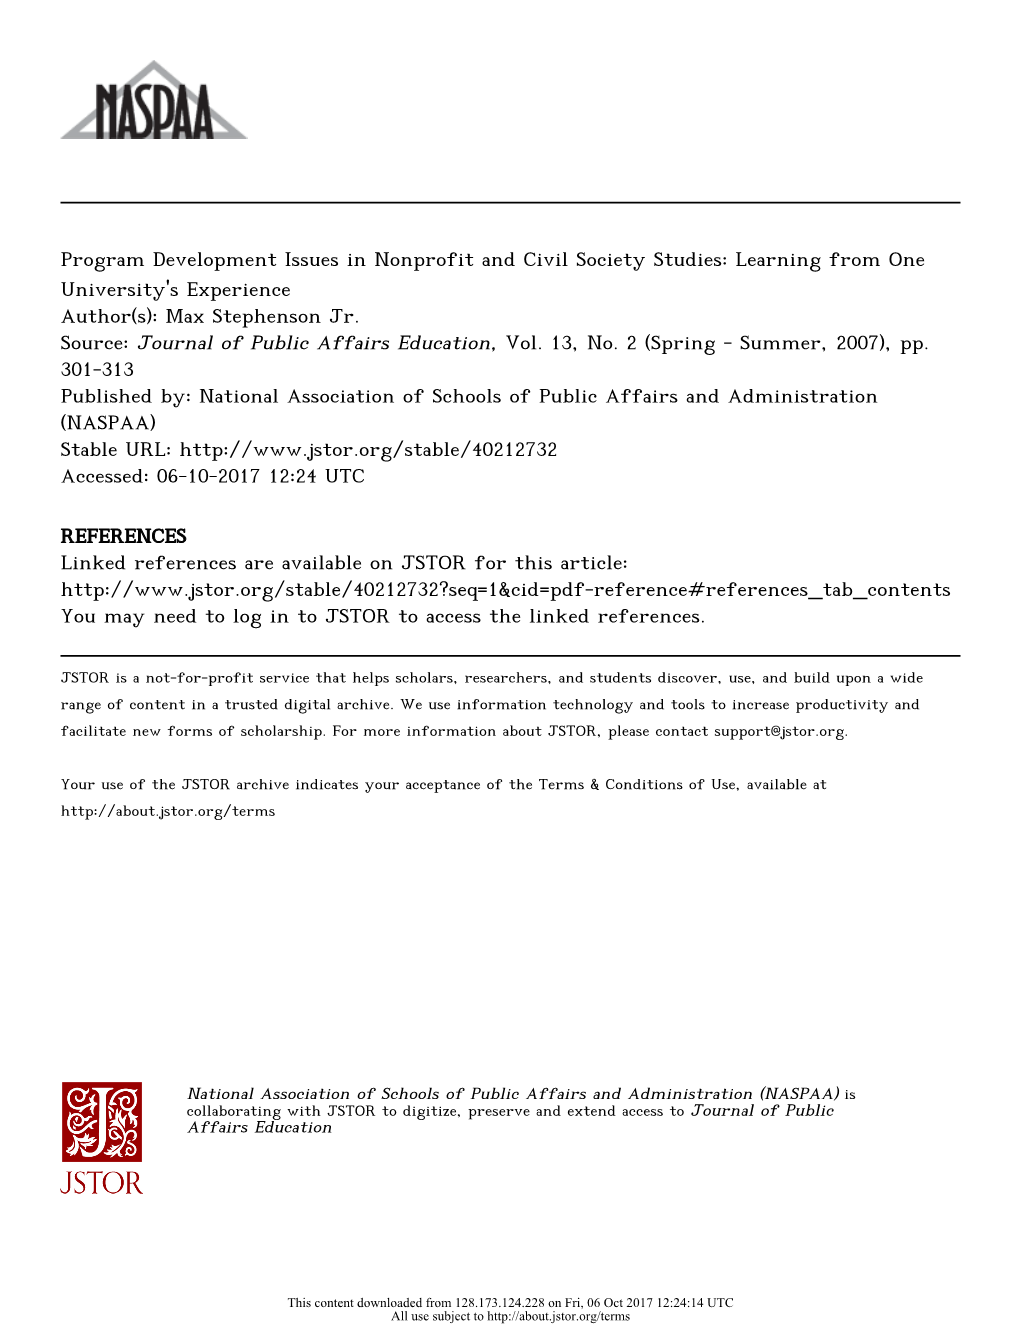 Program Development Issues in Nonprofit and Civil Society Studies: Learning from One University's Experience Author(S): Max Stephenson Jr